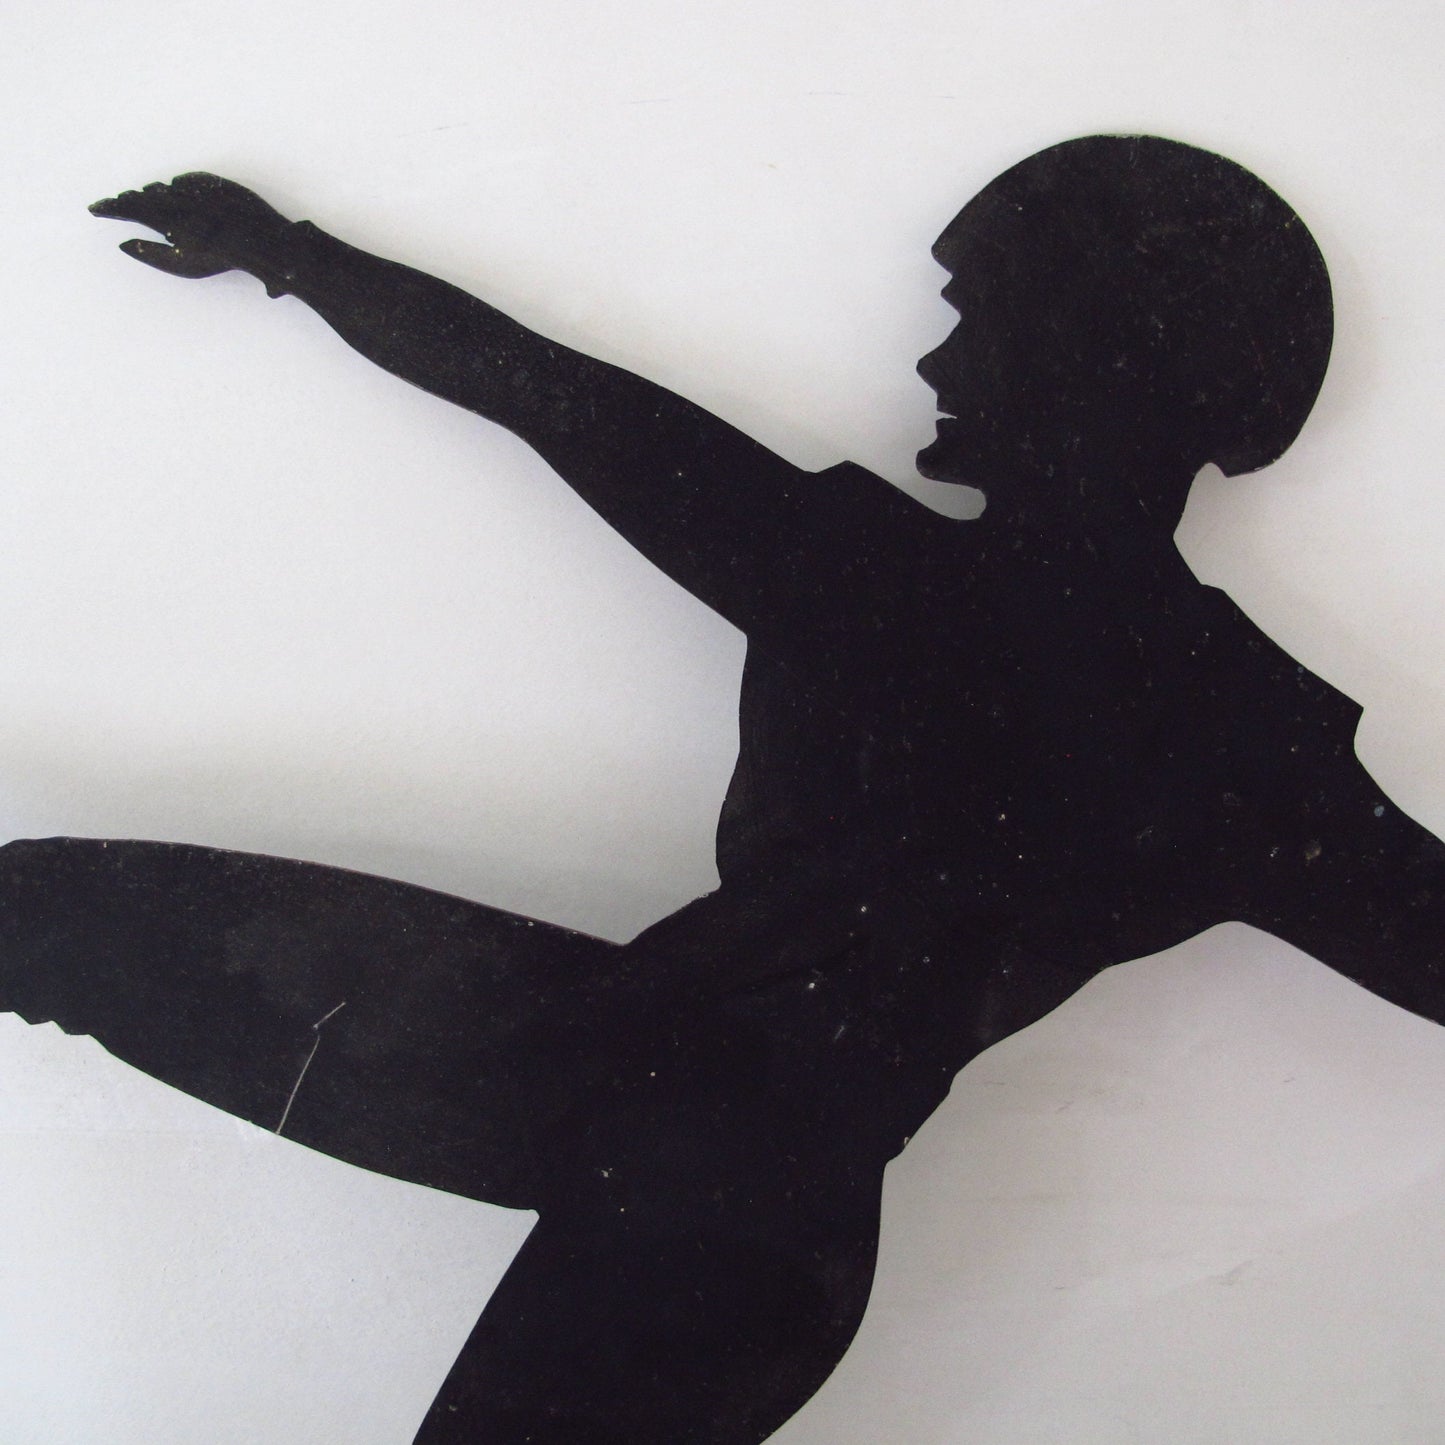 Football Player Kickoff Cut Metal Silhouette 1930s Kicking Antique Sign